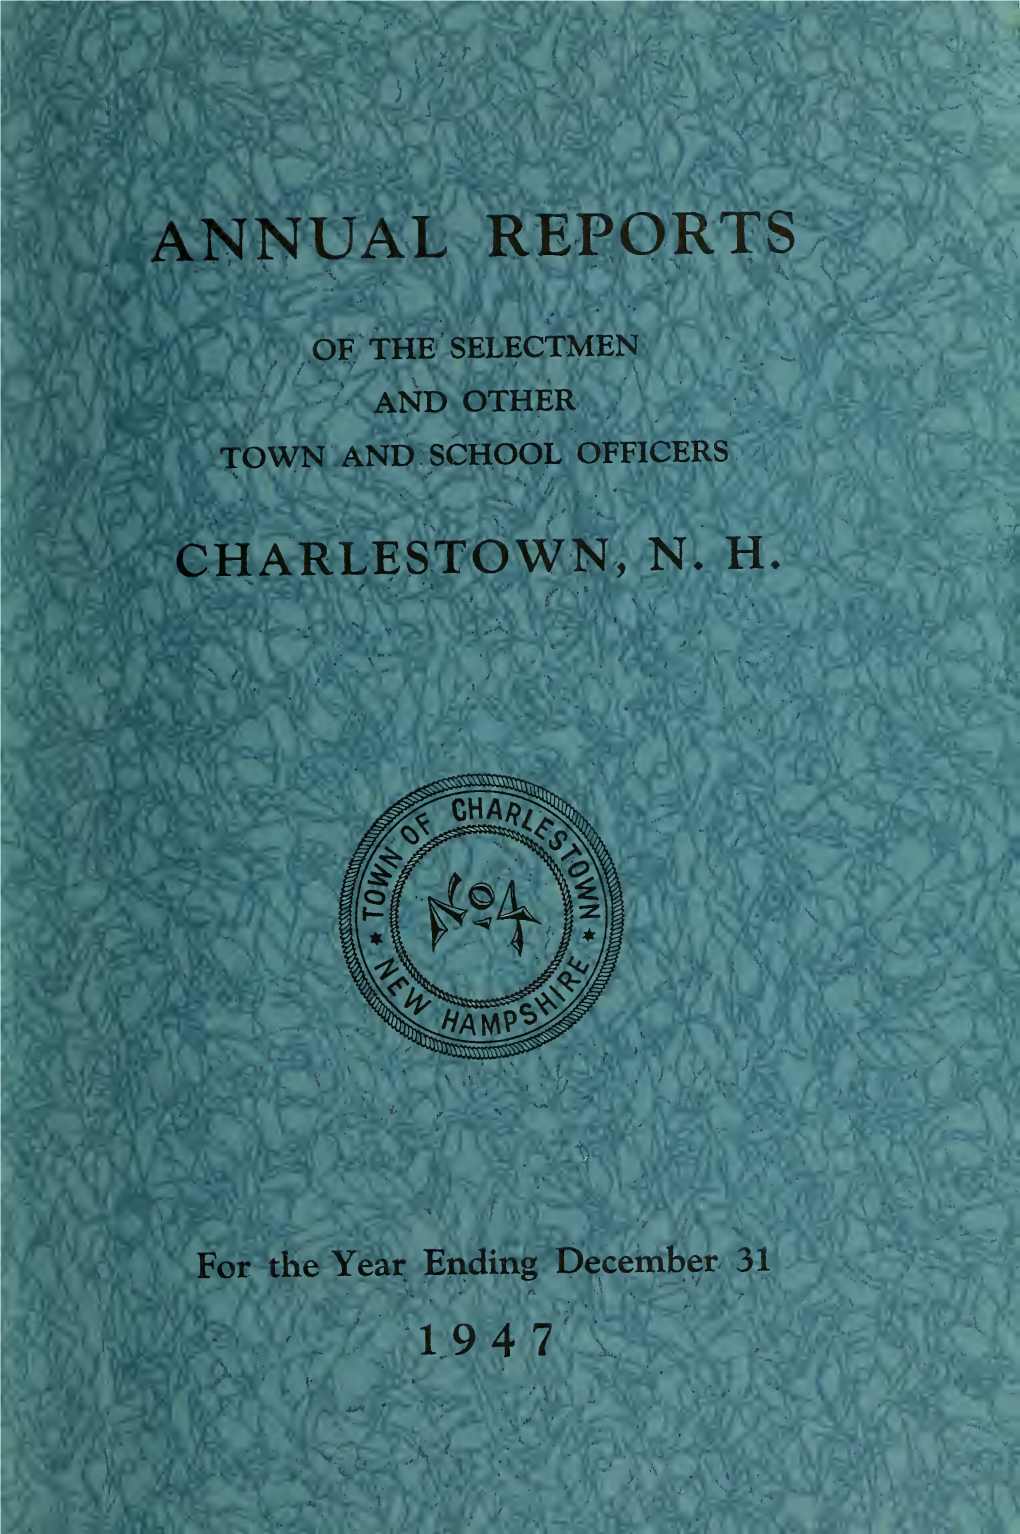 Annual Reports of the Selectmen and Other Town and School Officers